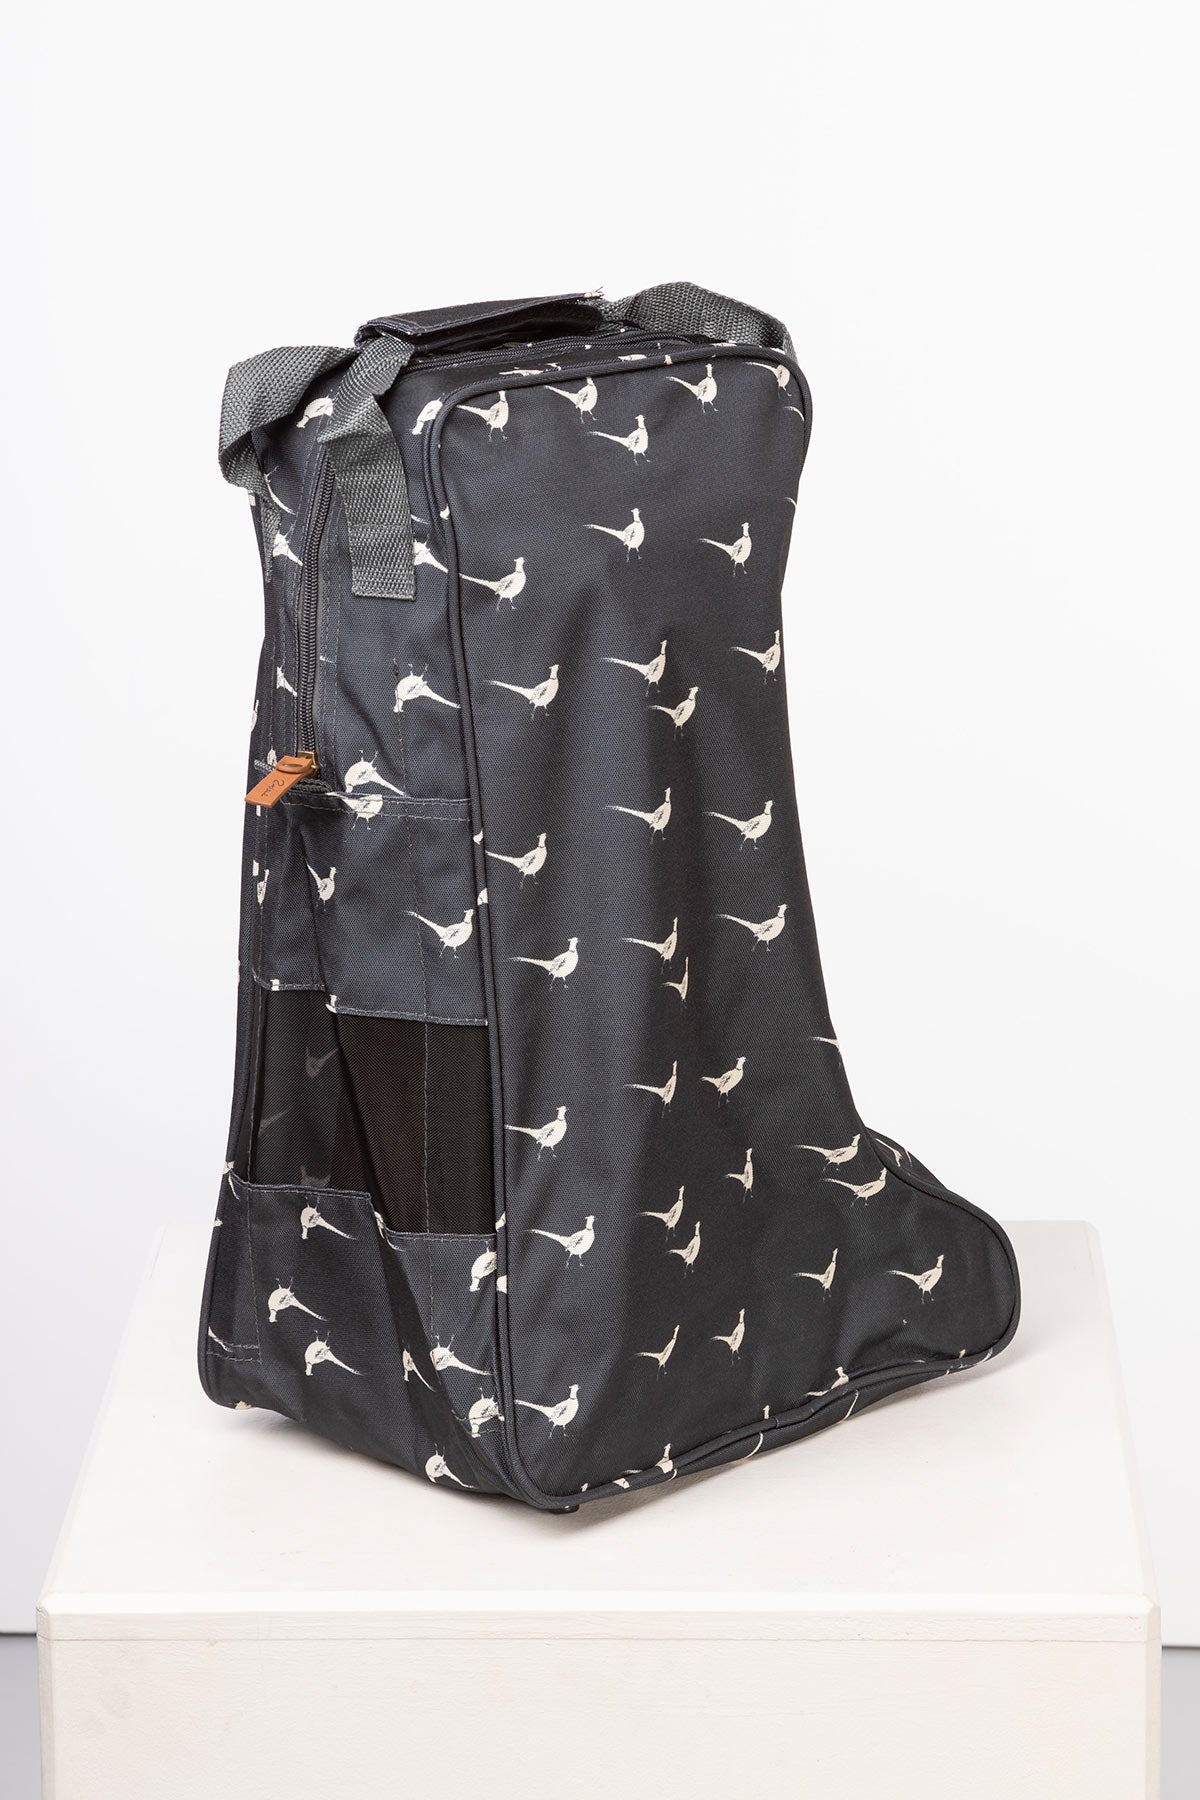 Patterned Wellington Boot Bag UK | Welly Boot Bag Carrier | Rydale